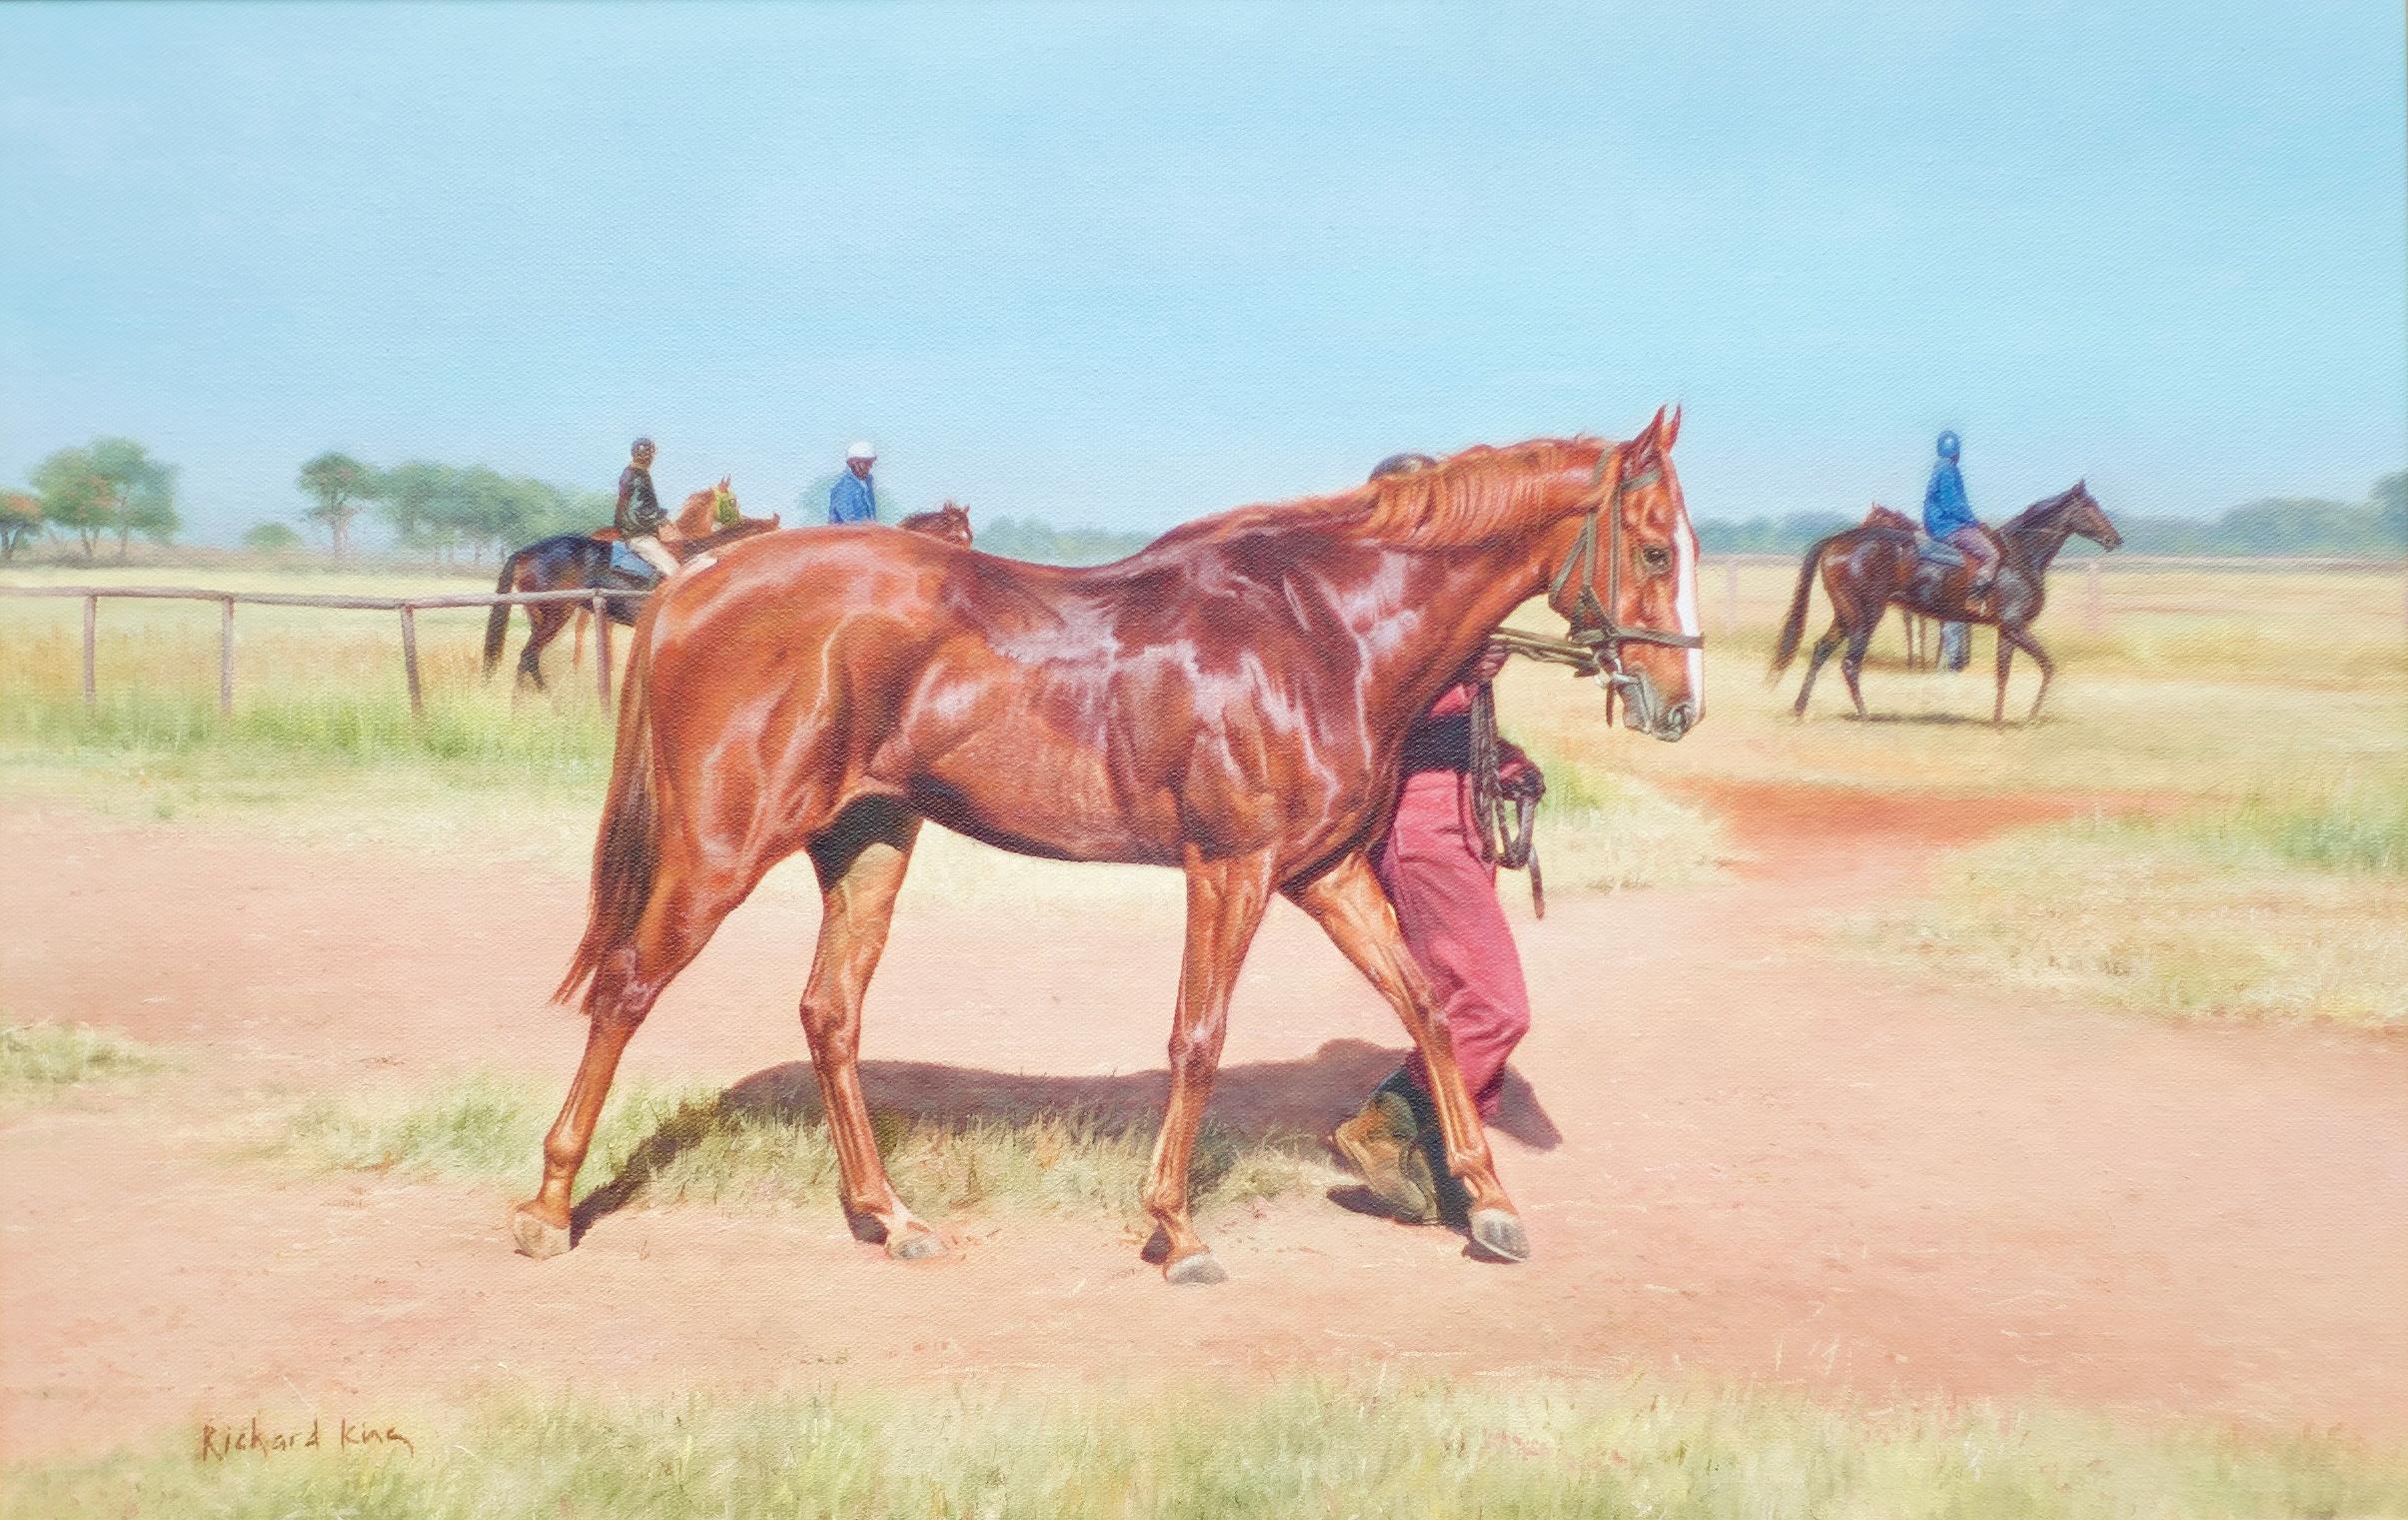 Richard King  Animal Painting - The Chestnut - Equestrian, Racing, Horse, Realist, Wildlife, Contemporary